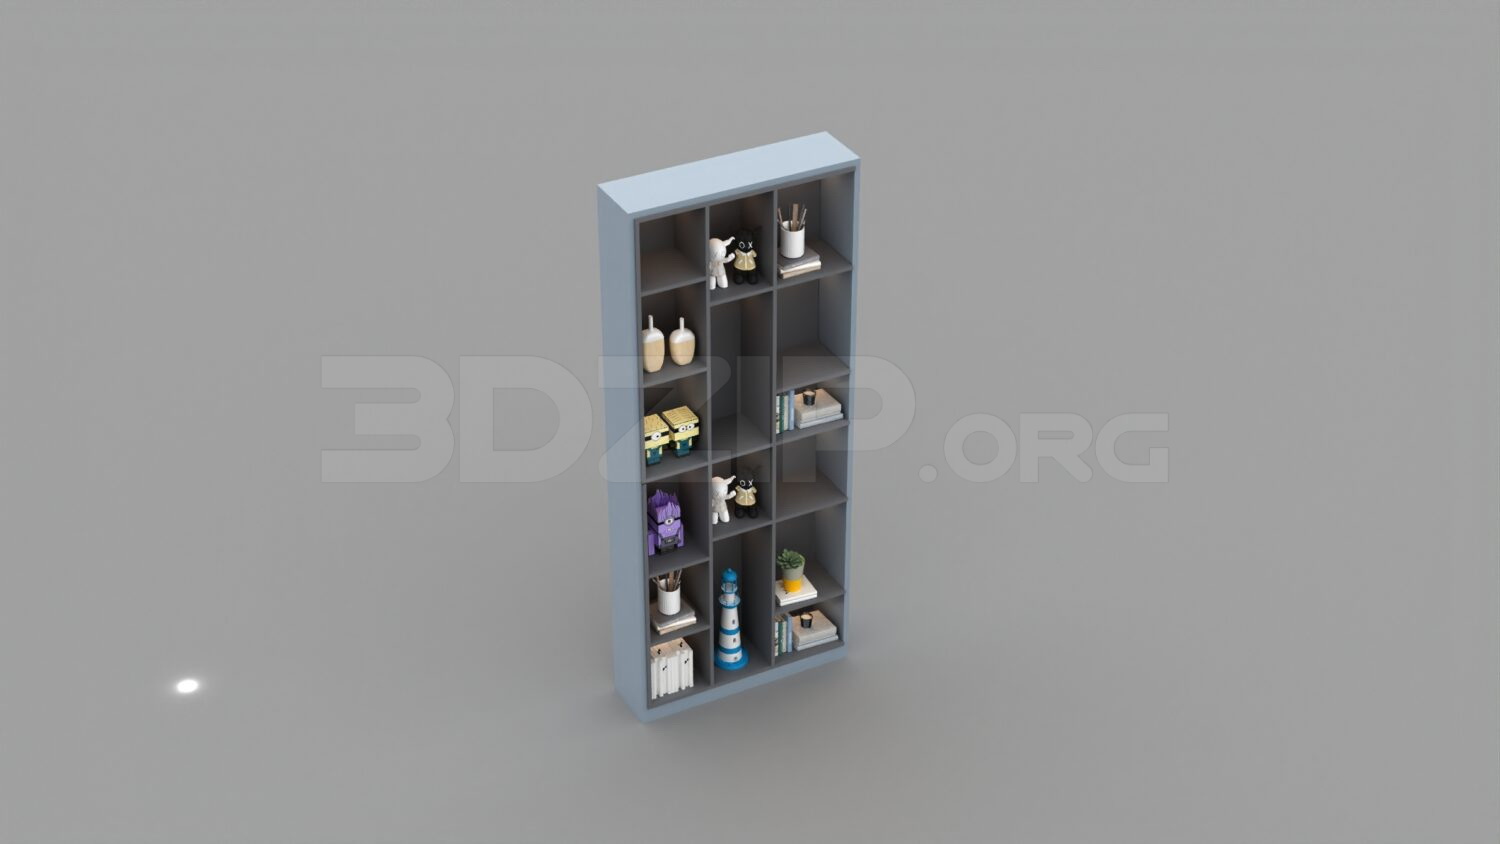 1819. Download Free Display Cabinets Model By Huy Hieu Lee